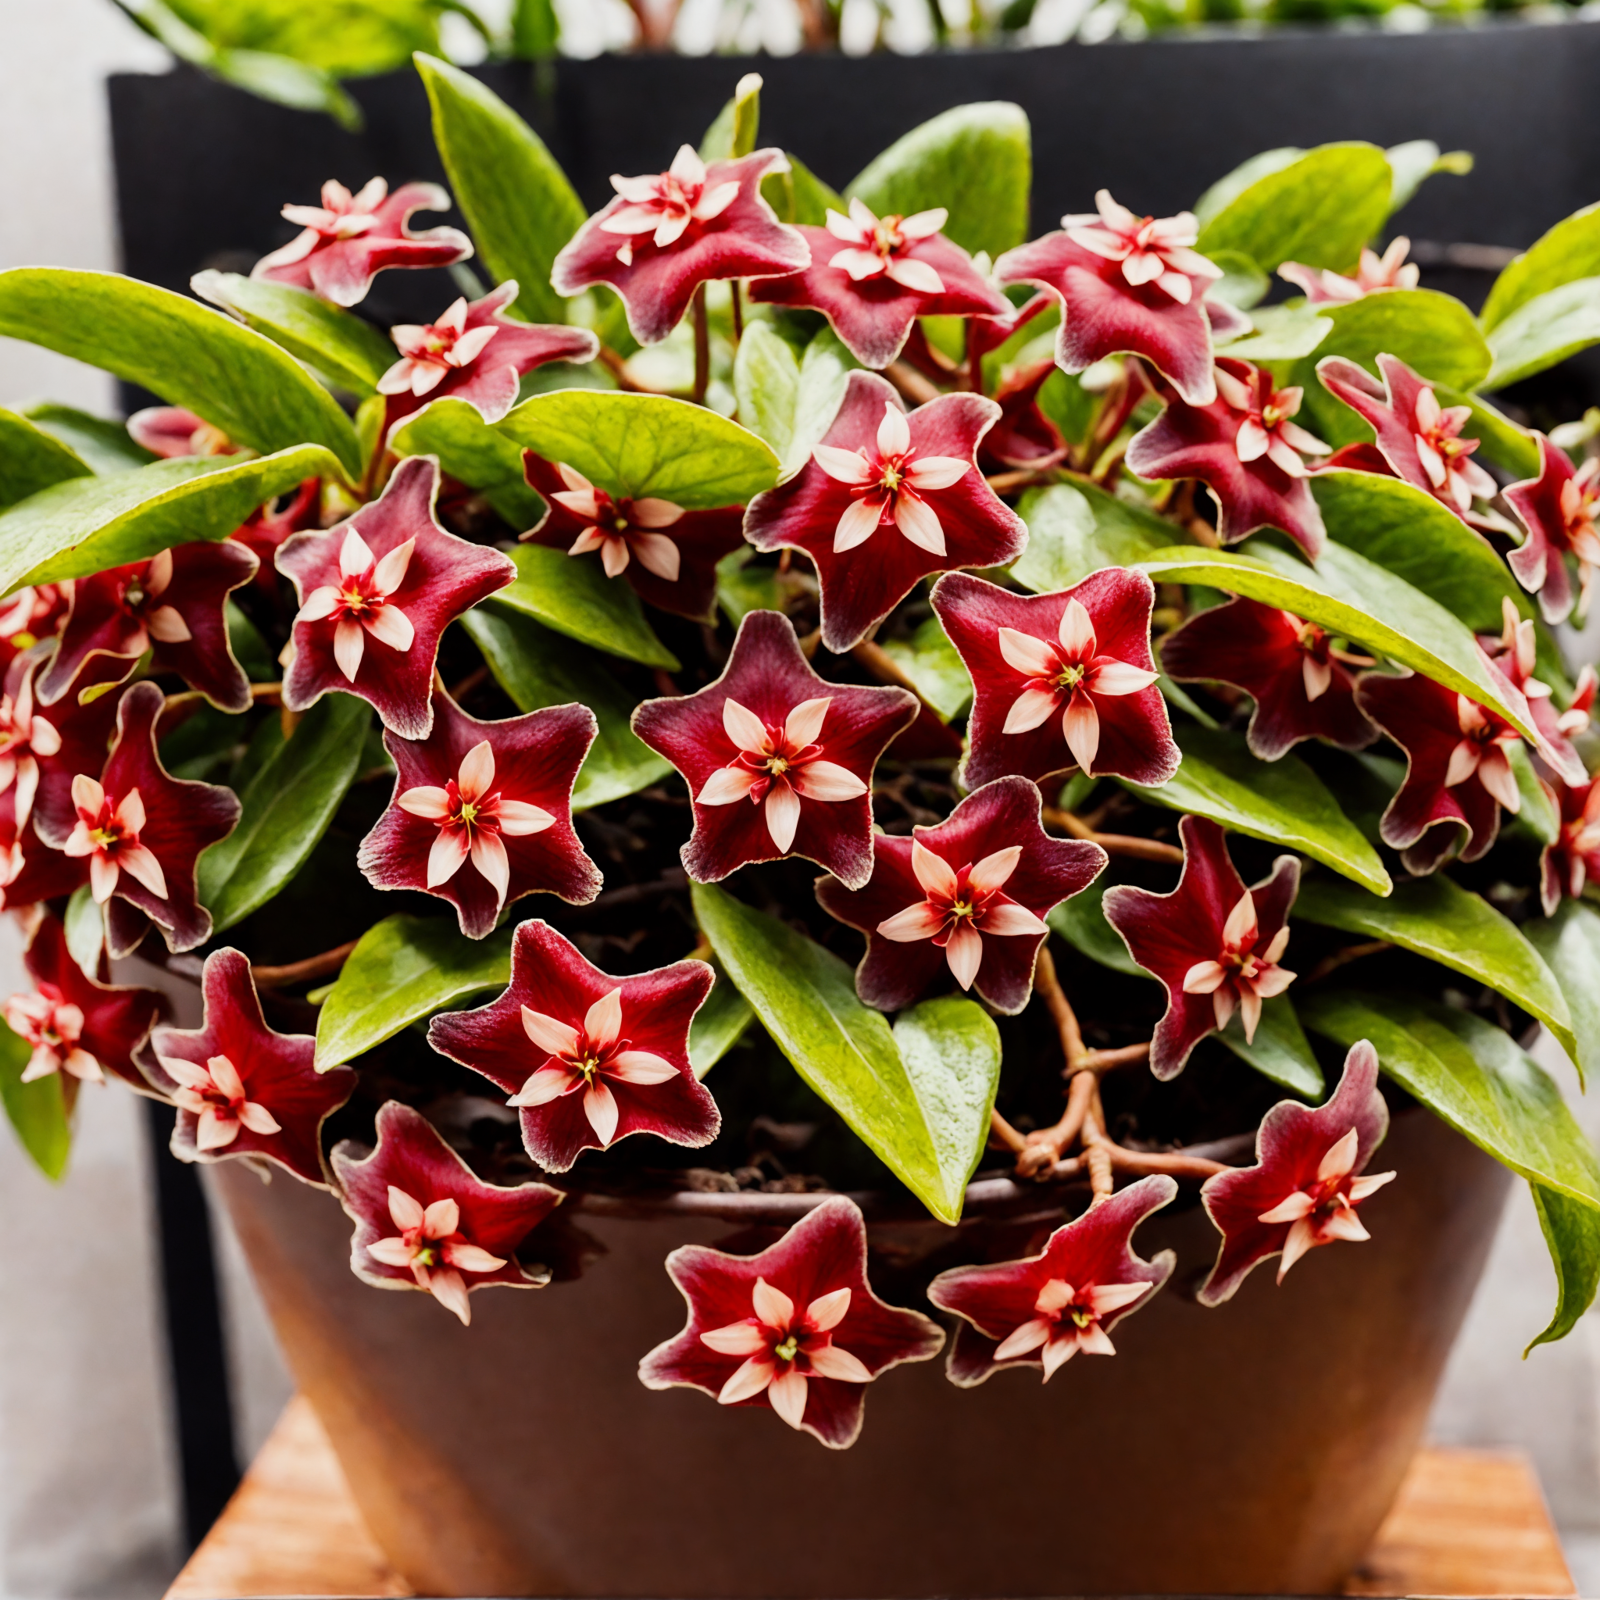 Hoya pubicalyx with red and white flowers in a brown vase, clear lighting, against a dark background.